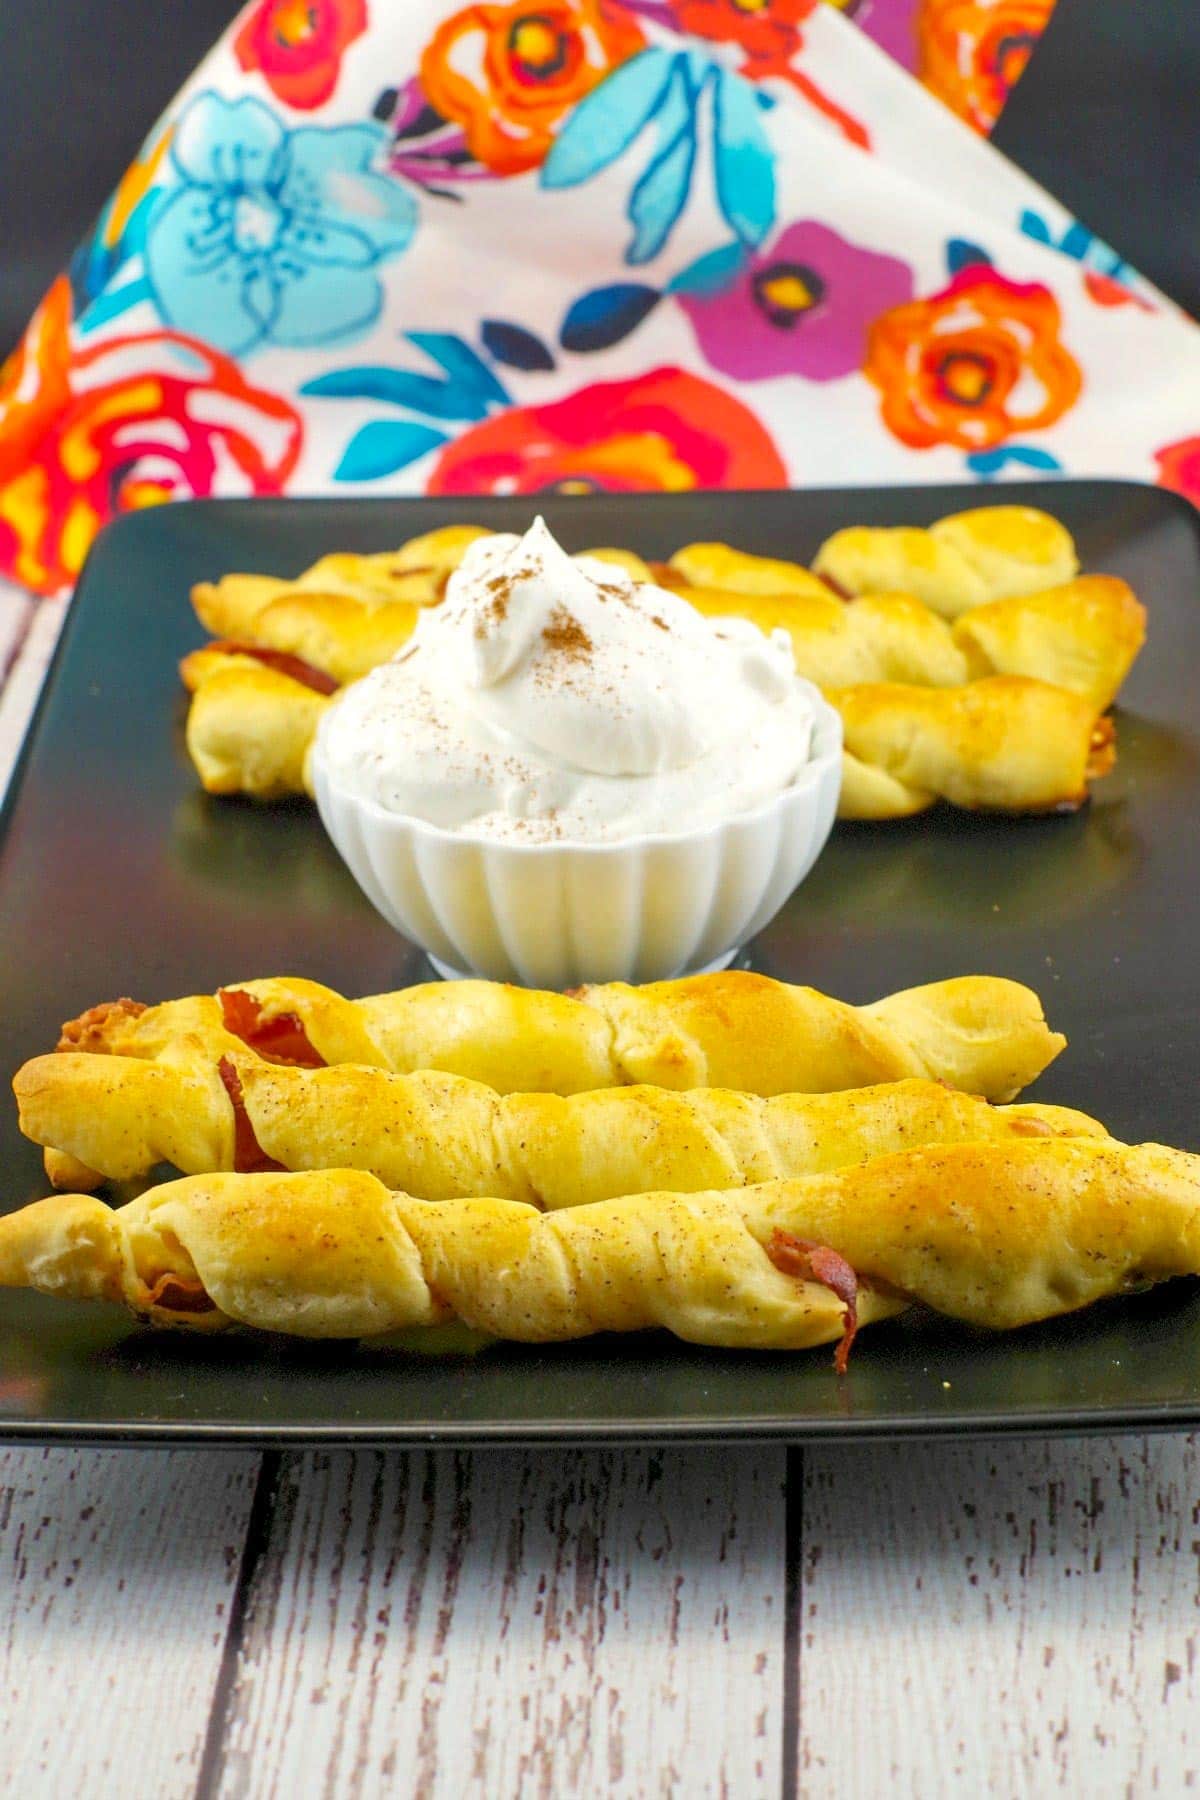 Pigs in a blanket breakfast on black tray with dip in the middle 